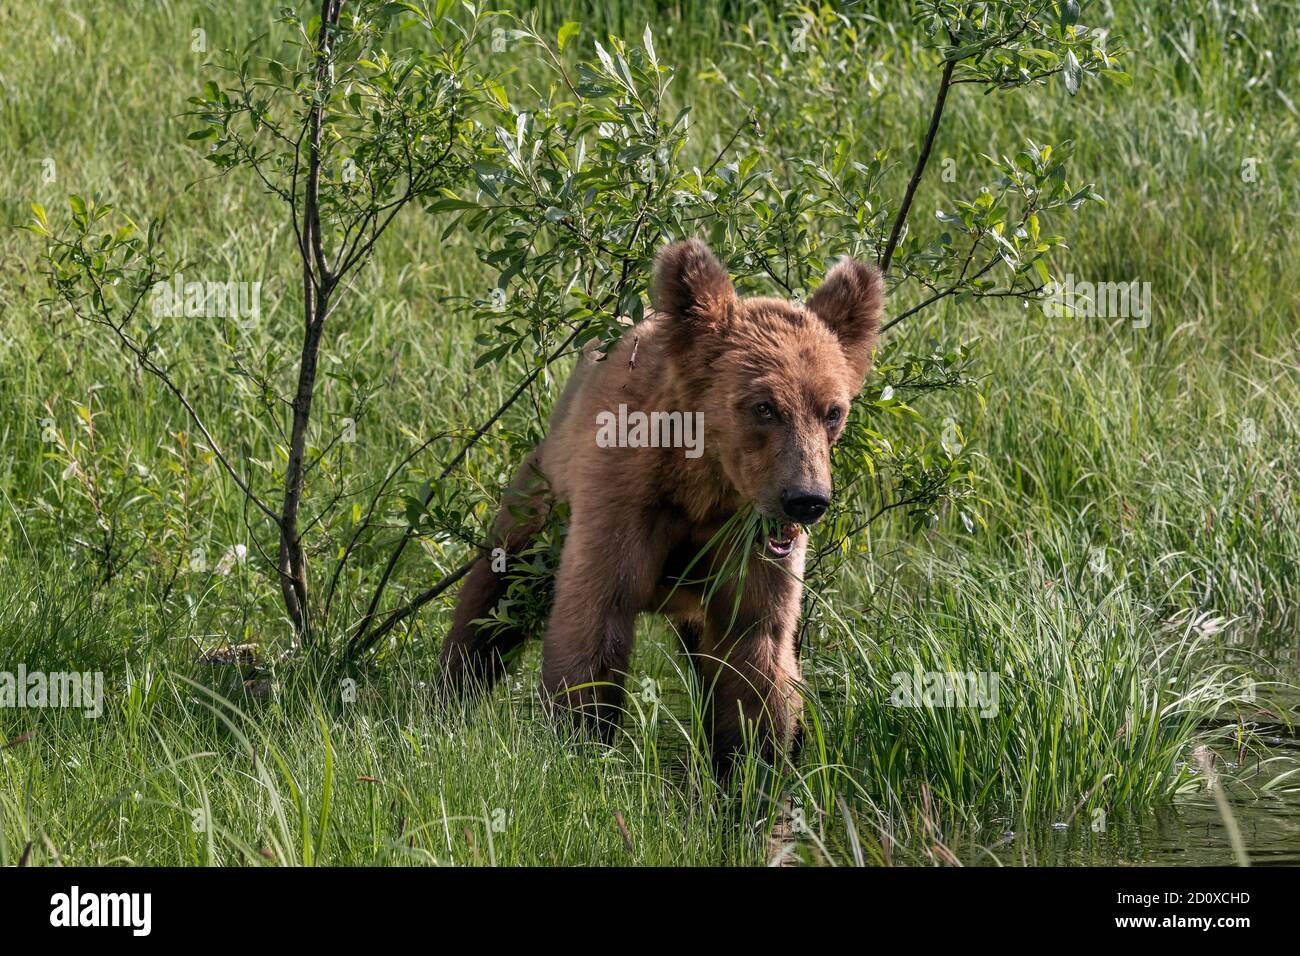 Grizzly cub eating sedge grass by the water's edge, Khutzeymateen, BC Stock Photo